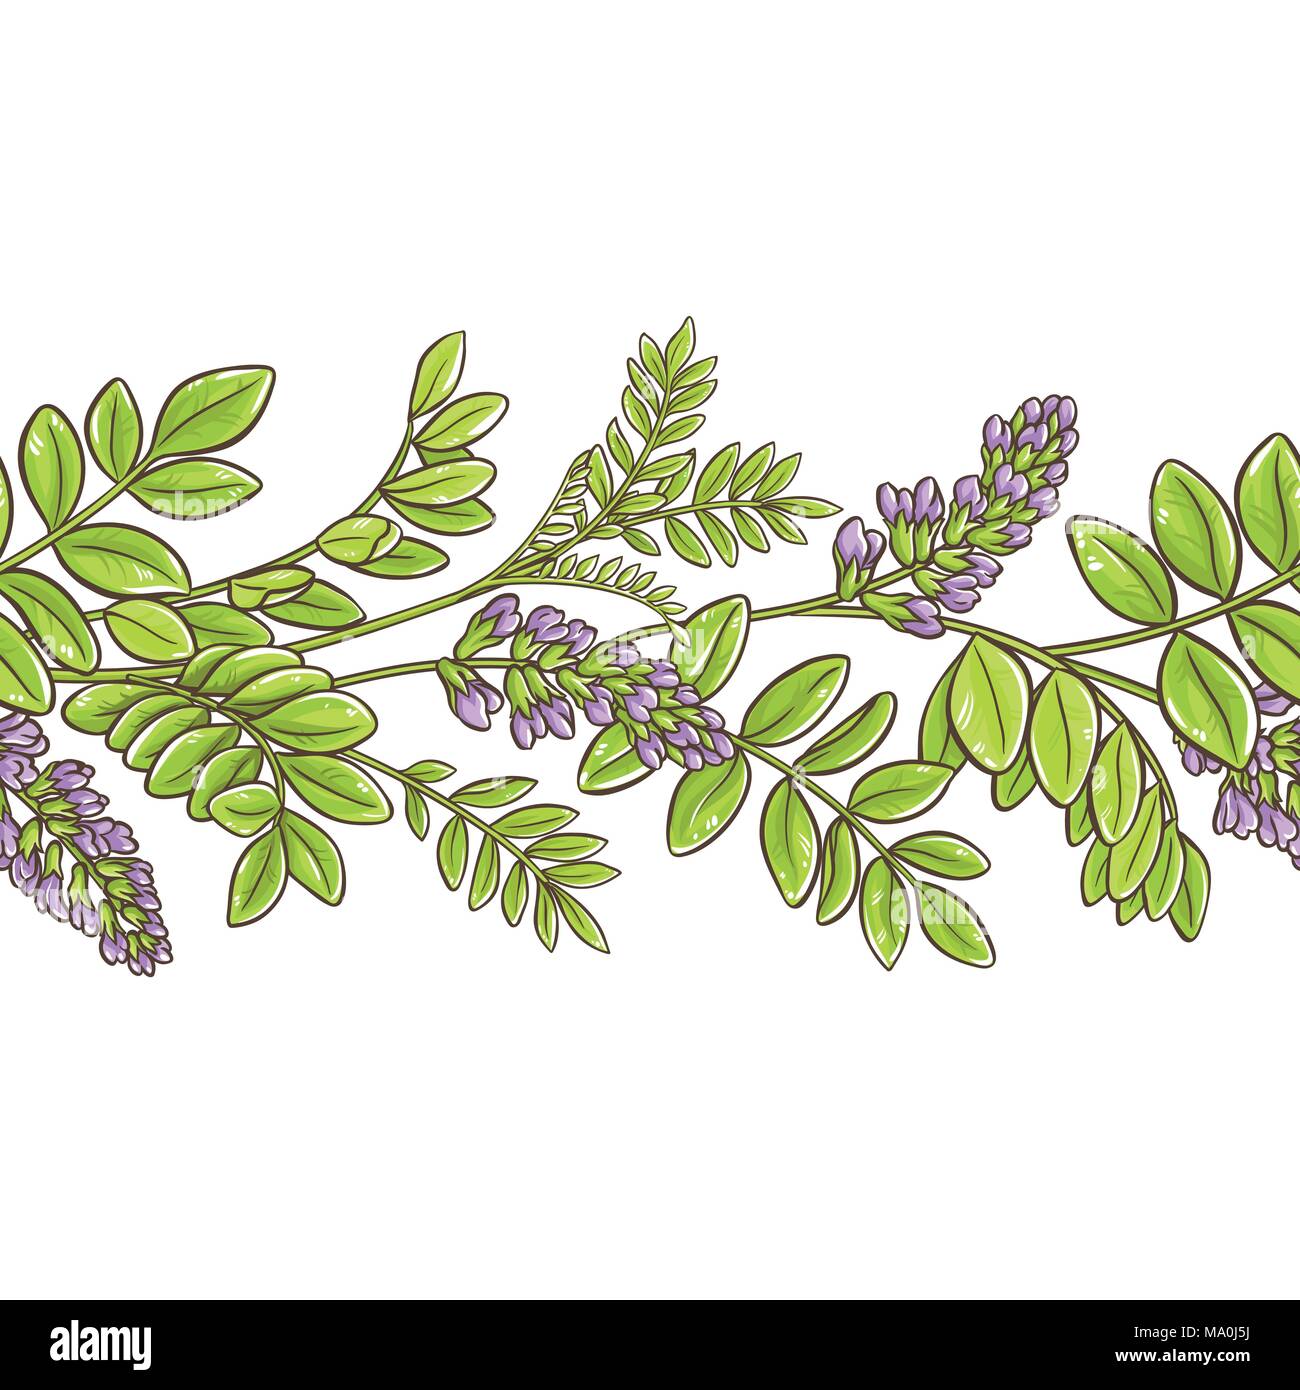 licorice plant vector pattern on white background Stock Vector